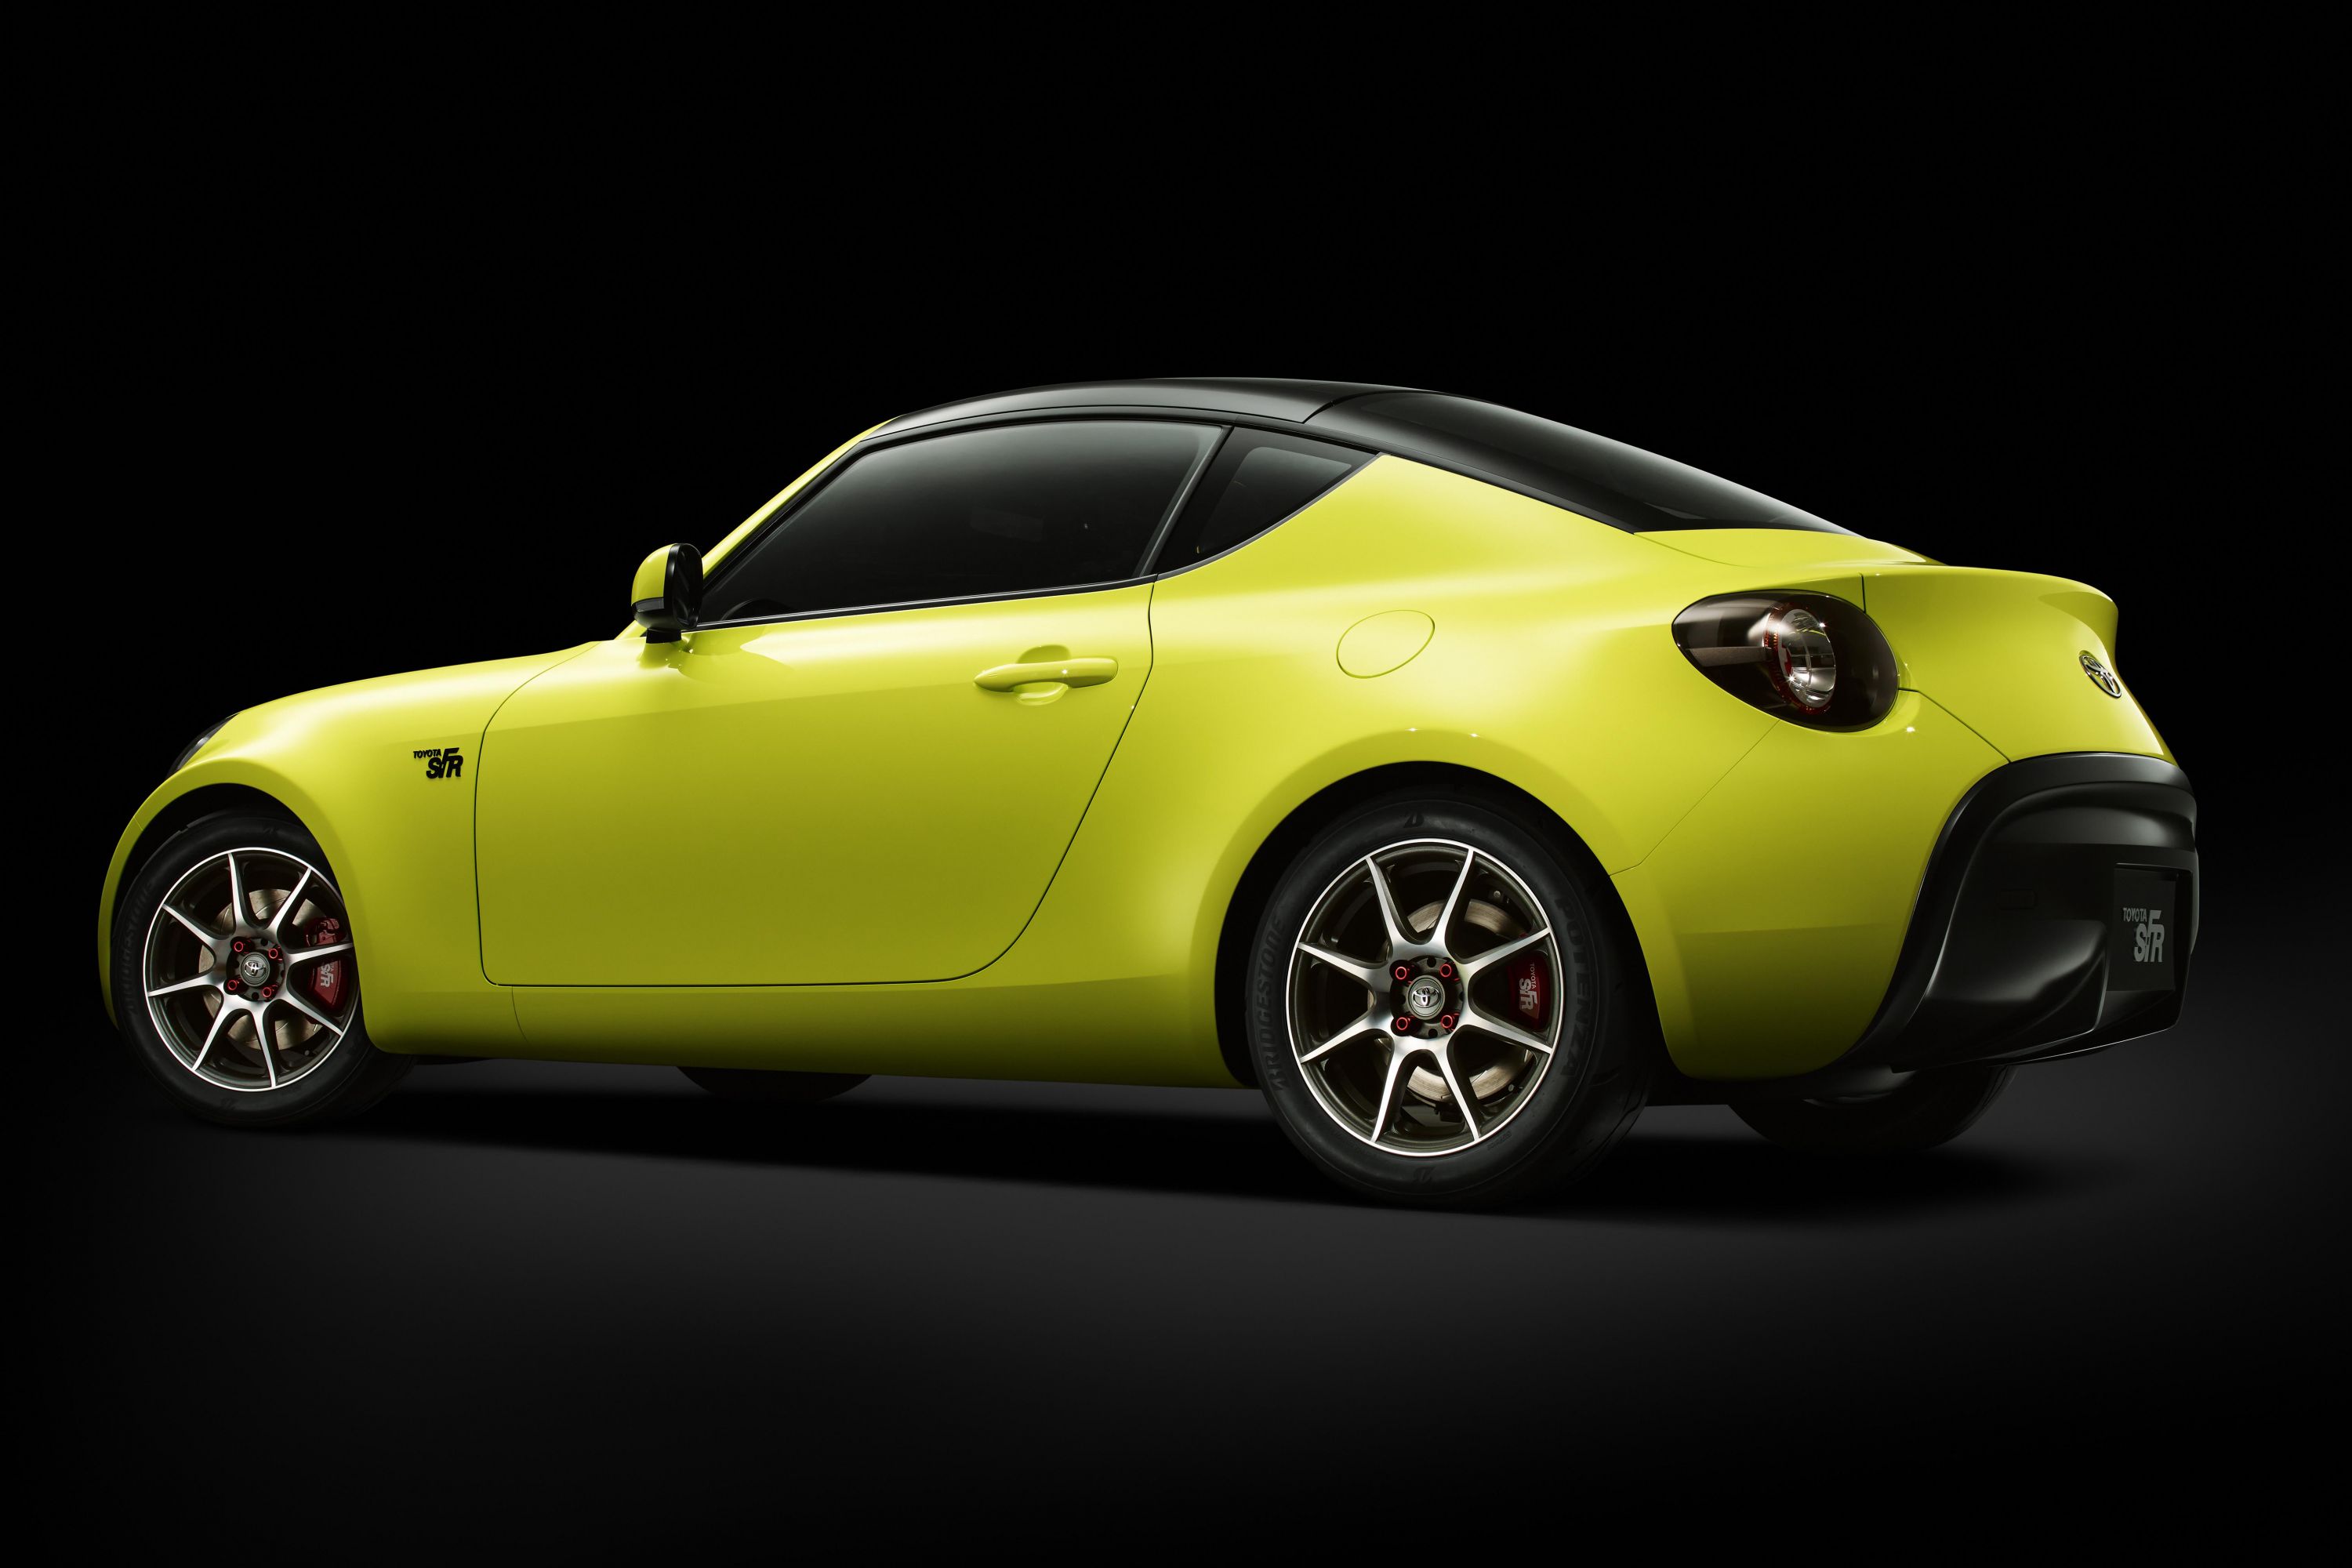 toyota’s next sports car to be roadster mazda mx-5 rival – report